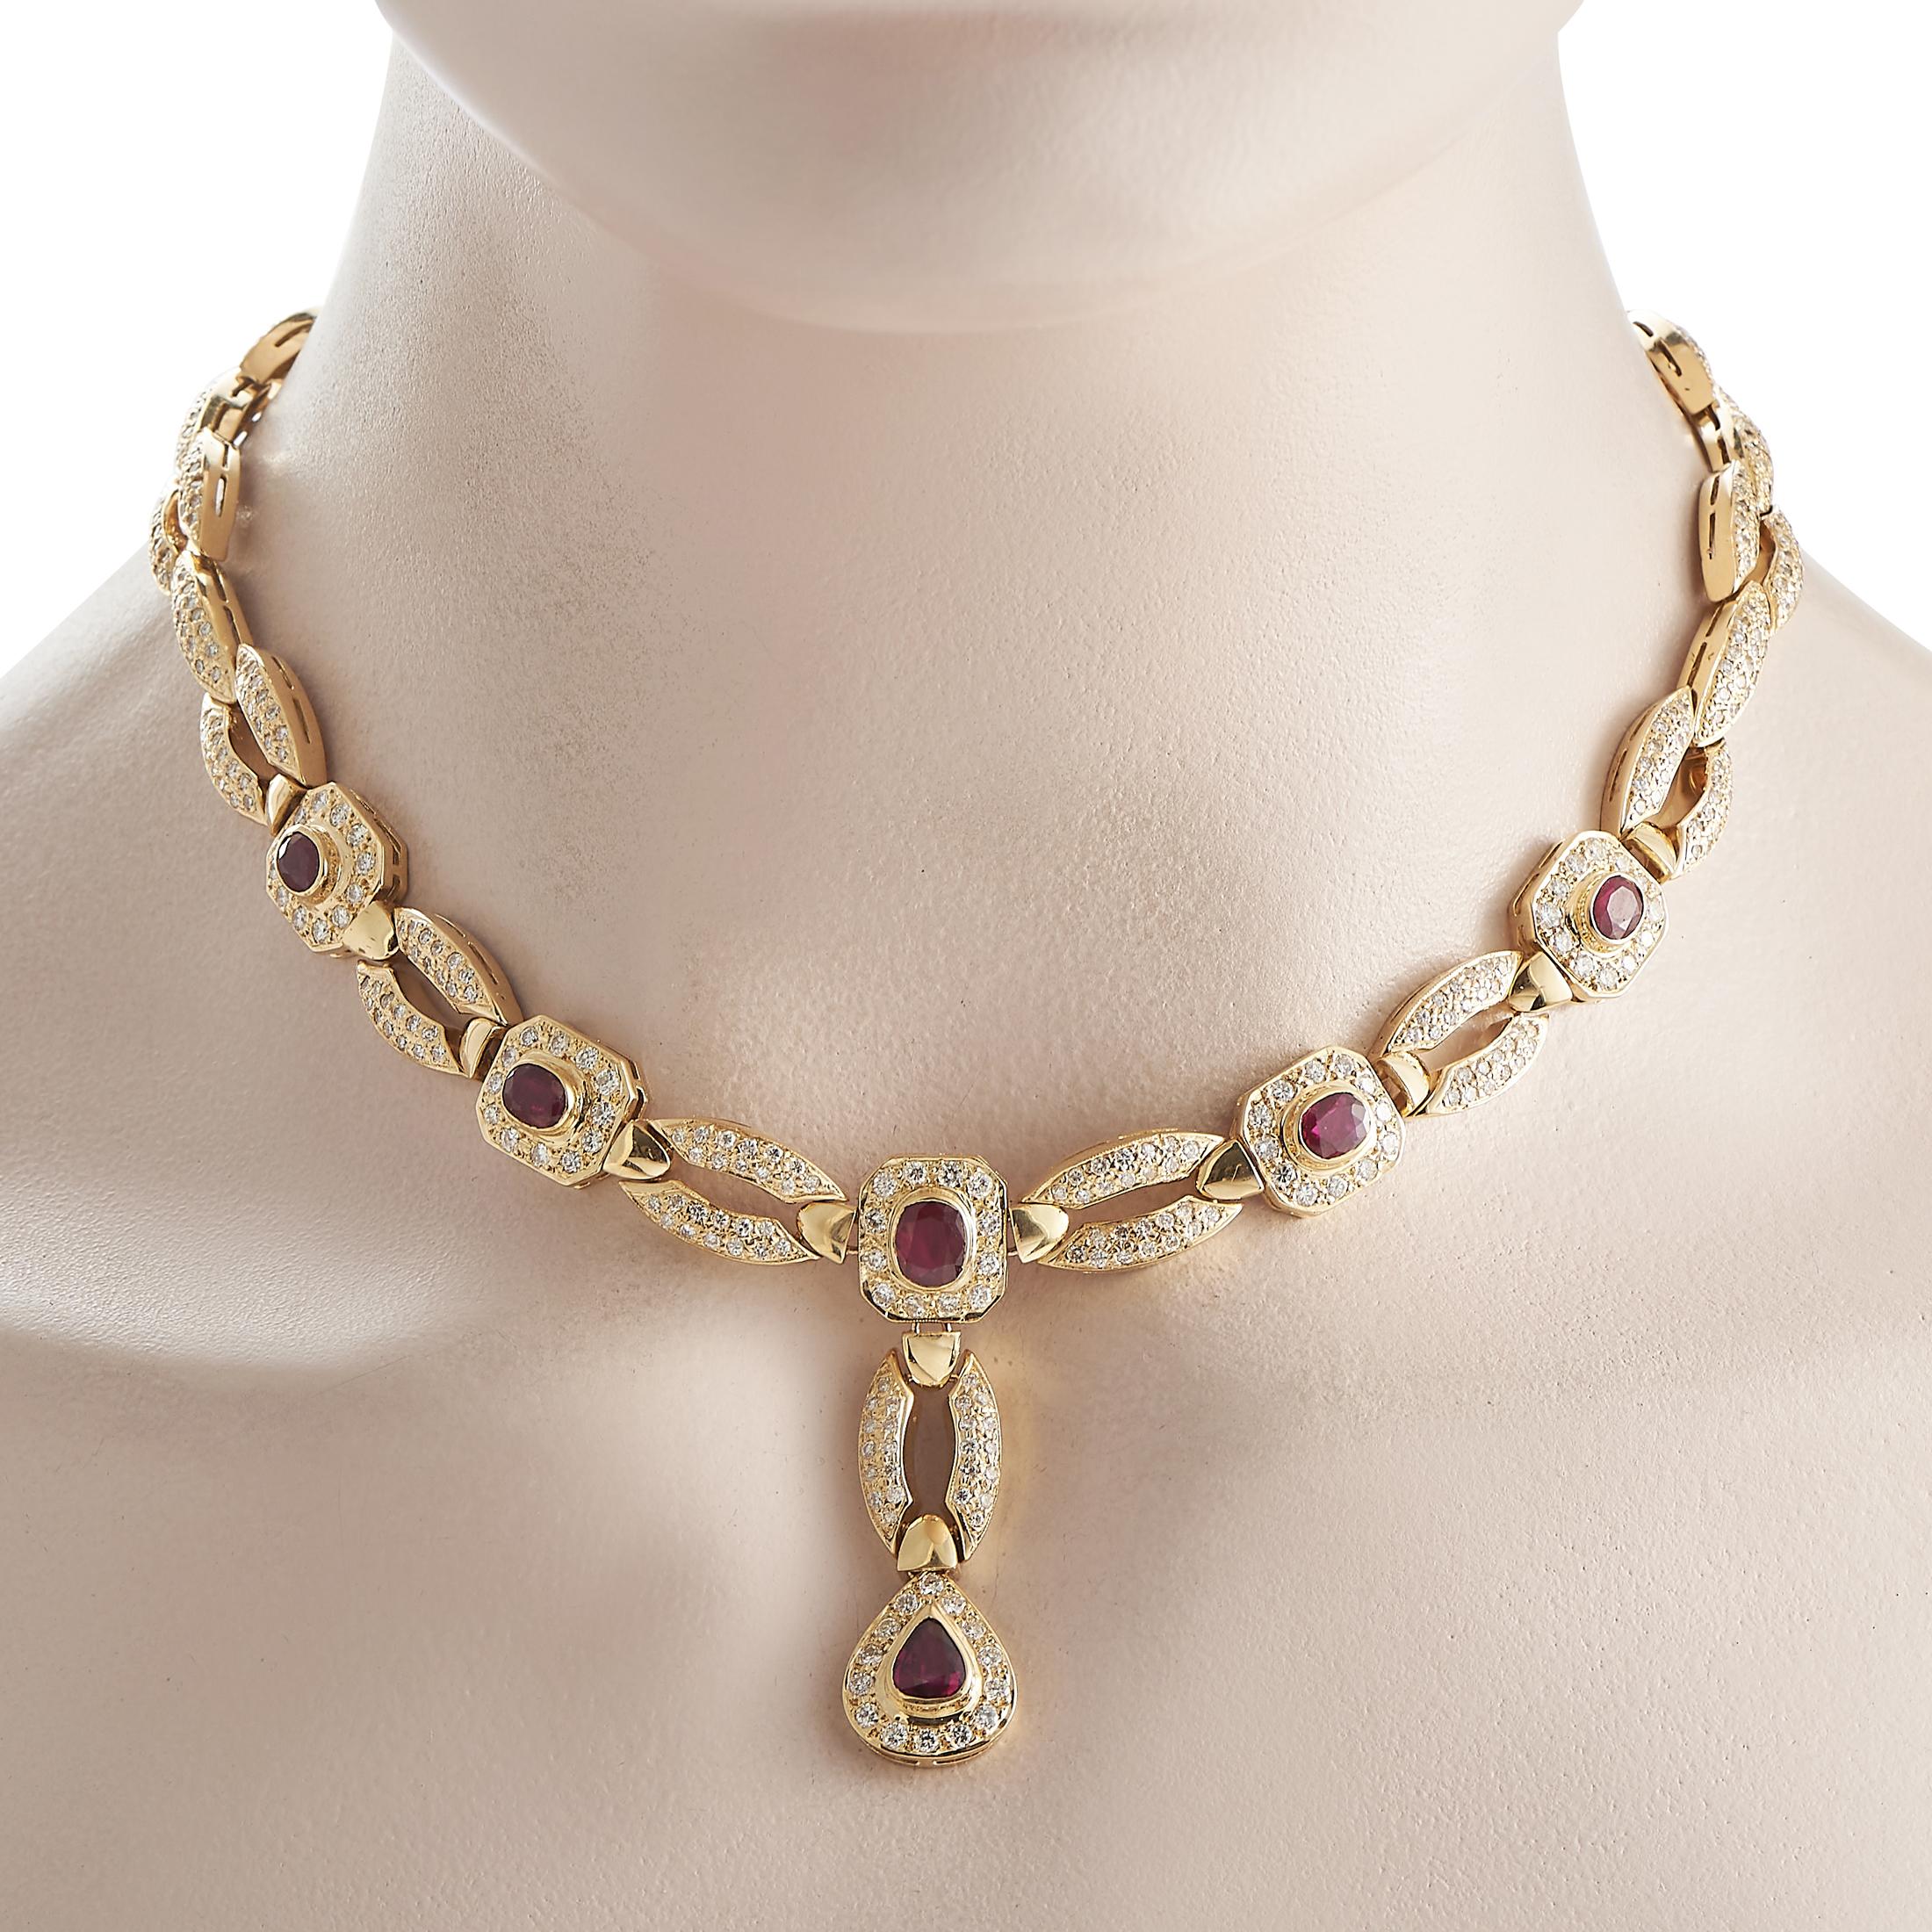 Go for full-on glamour with this diamond and ruby necklace. Designed with regal elegance in mind, this stunner features a Y-shaped chain composed of alternating pave-set oval links and ruby-punctuated octagonal plaques. The Y-tail terminates with a